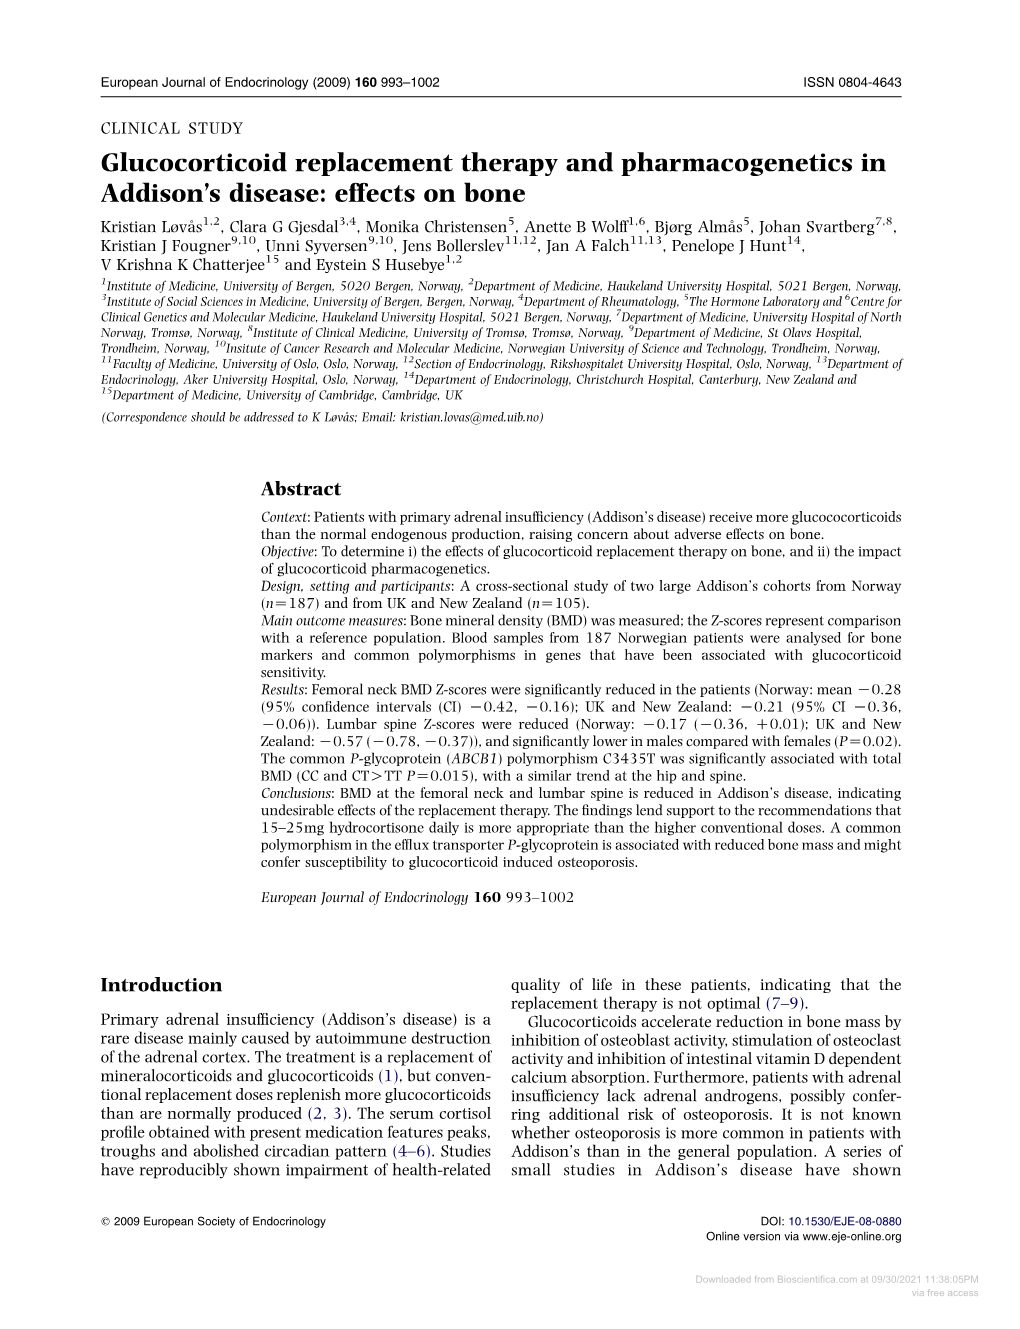 Glucocorticoid Replacement Therapy and Pharmacogenetics in Addison's Disease: Effects on Bone